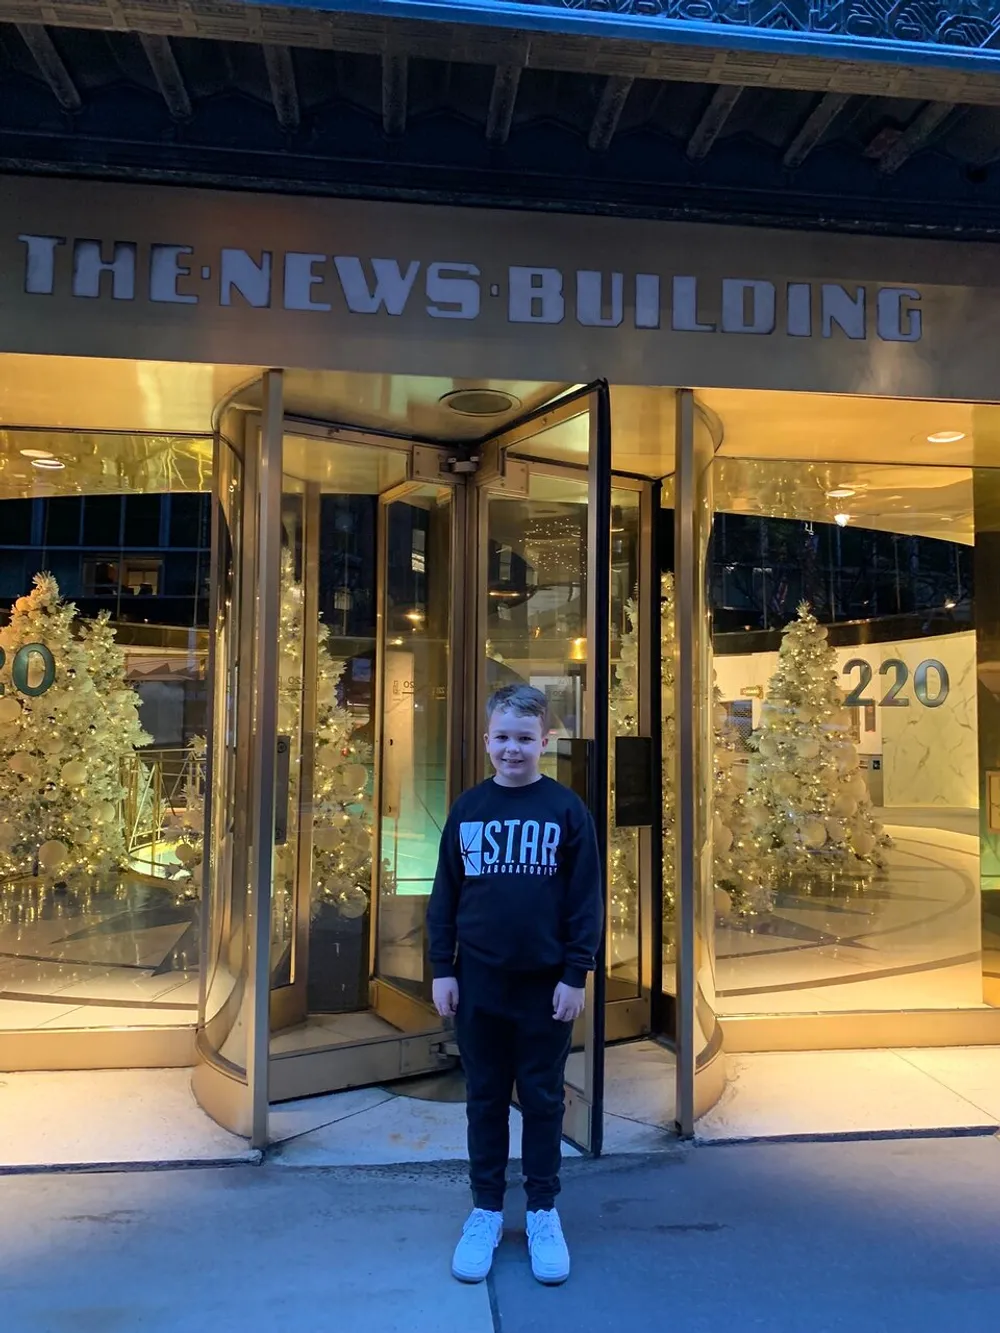 A young person is standing in front of the entrance to The News Building decorated with festive trees under an illuminated sign